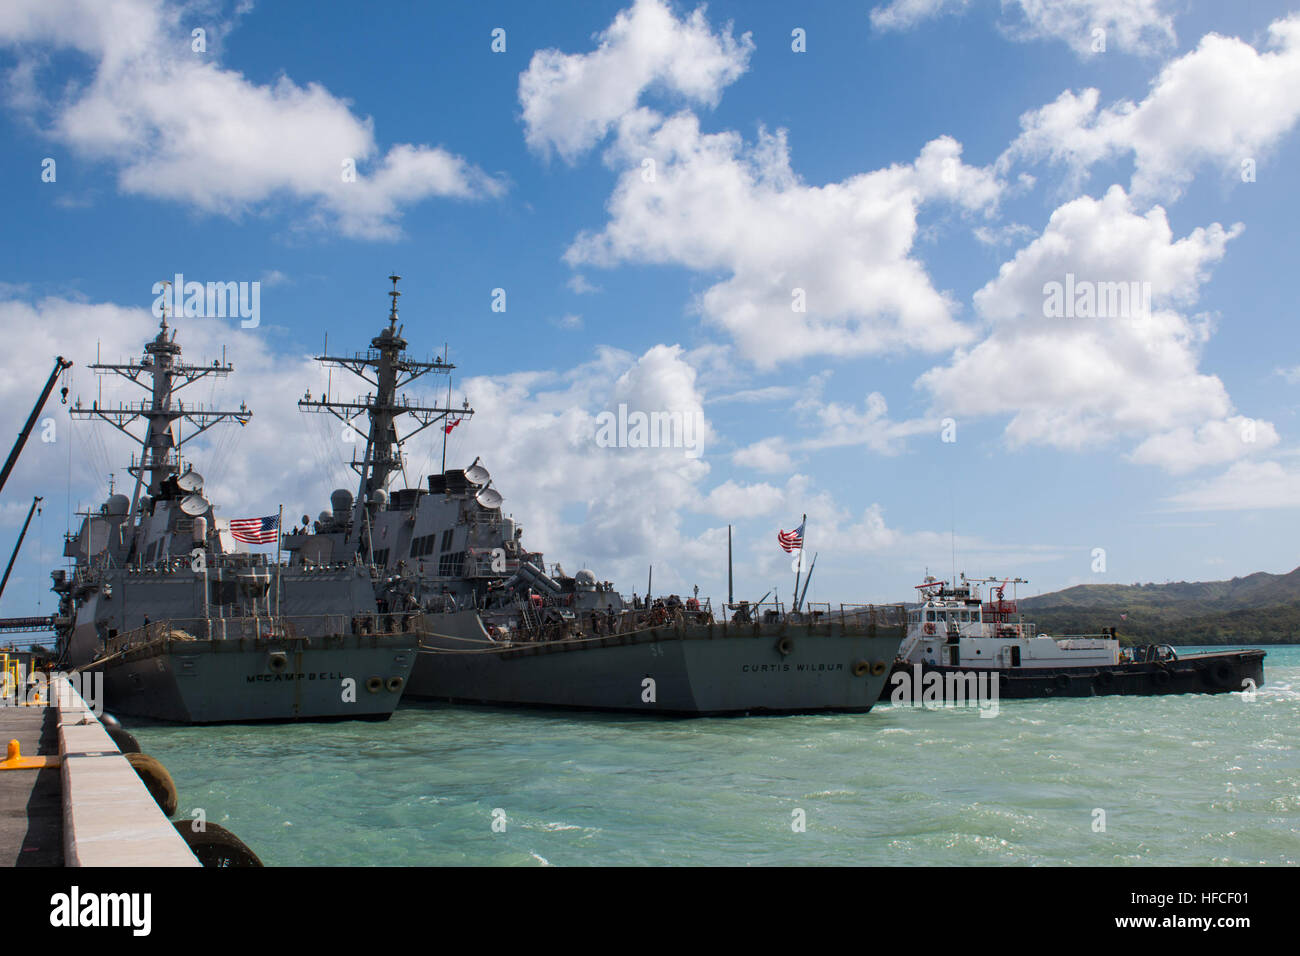 APRA HARBOR, Guam (March 4, 2016) – The destroyer USS Curtis Wilbur (DDG-54), gets tugged next to USS McCampbell (DDG-85) at Apra Harbor, U.S. Naval Base Guam, for a short in-port period prior to the bilateral exercise Multi-Sail 2016 (MS-16).  Ten total naval surface combatants assigned to the U.S. and Japanese navies arrived in-port to Apra Harbor, increasing the total number of visiting and home-ported vessels at the base to 20 and marked the largest contingent of vessels in Apra Harbor in more than 30 years. (Released/Jeff Landis, Major, USMC (Ret.), Director of Public Affairs/Communicatio Stock Photo